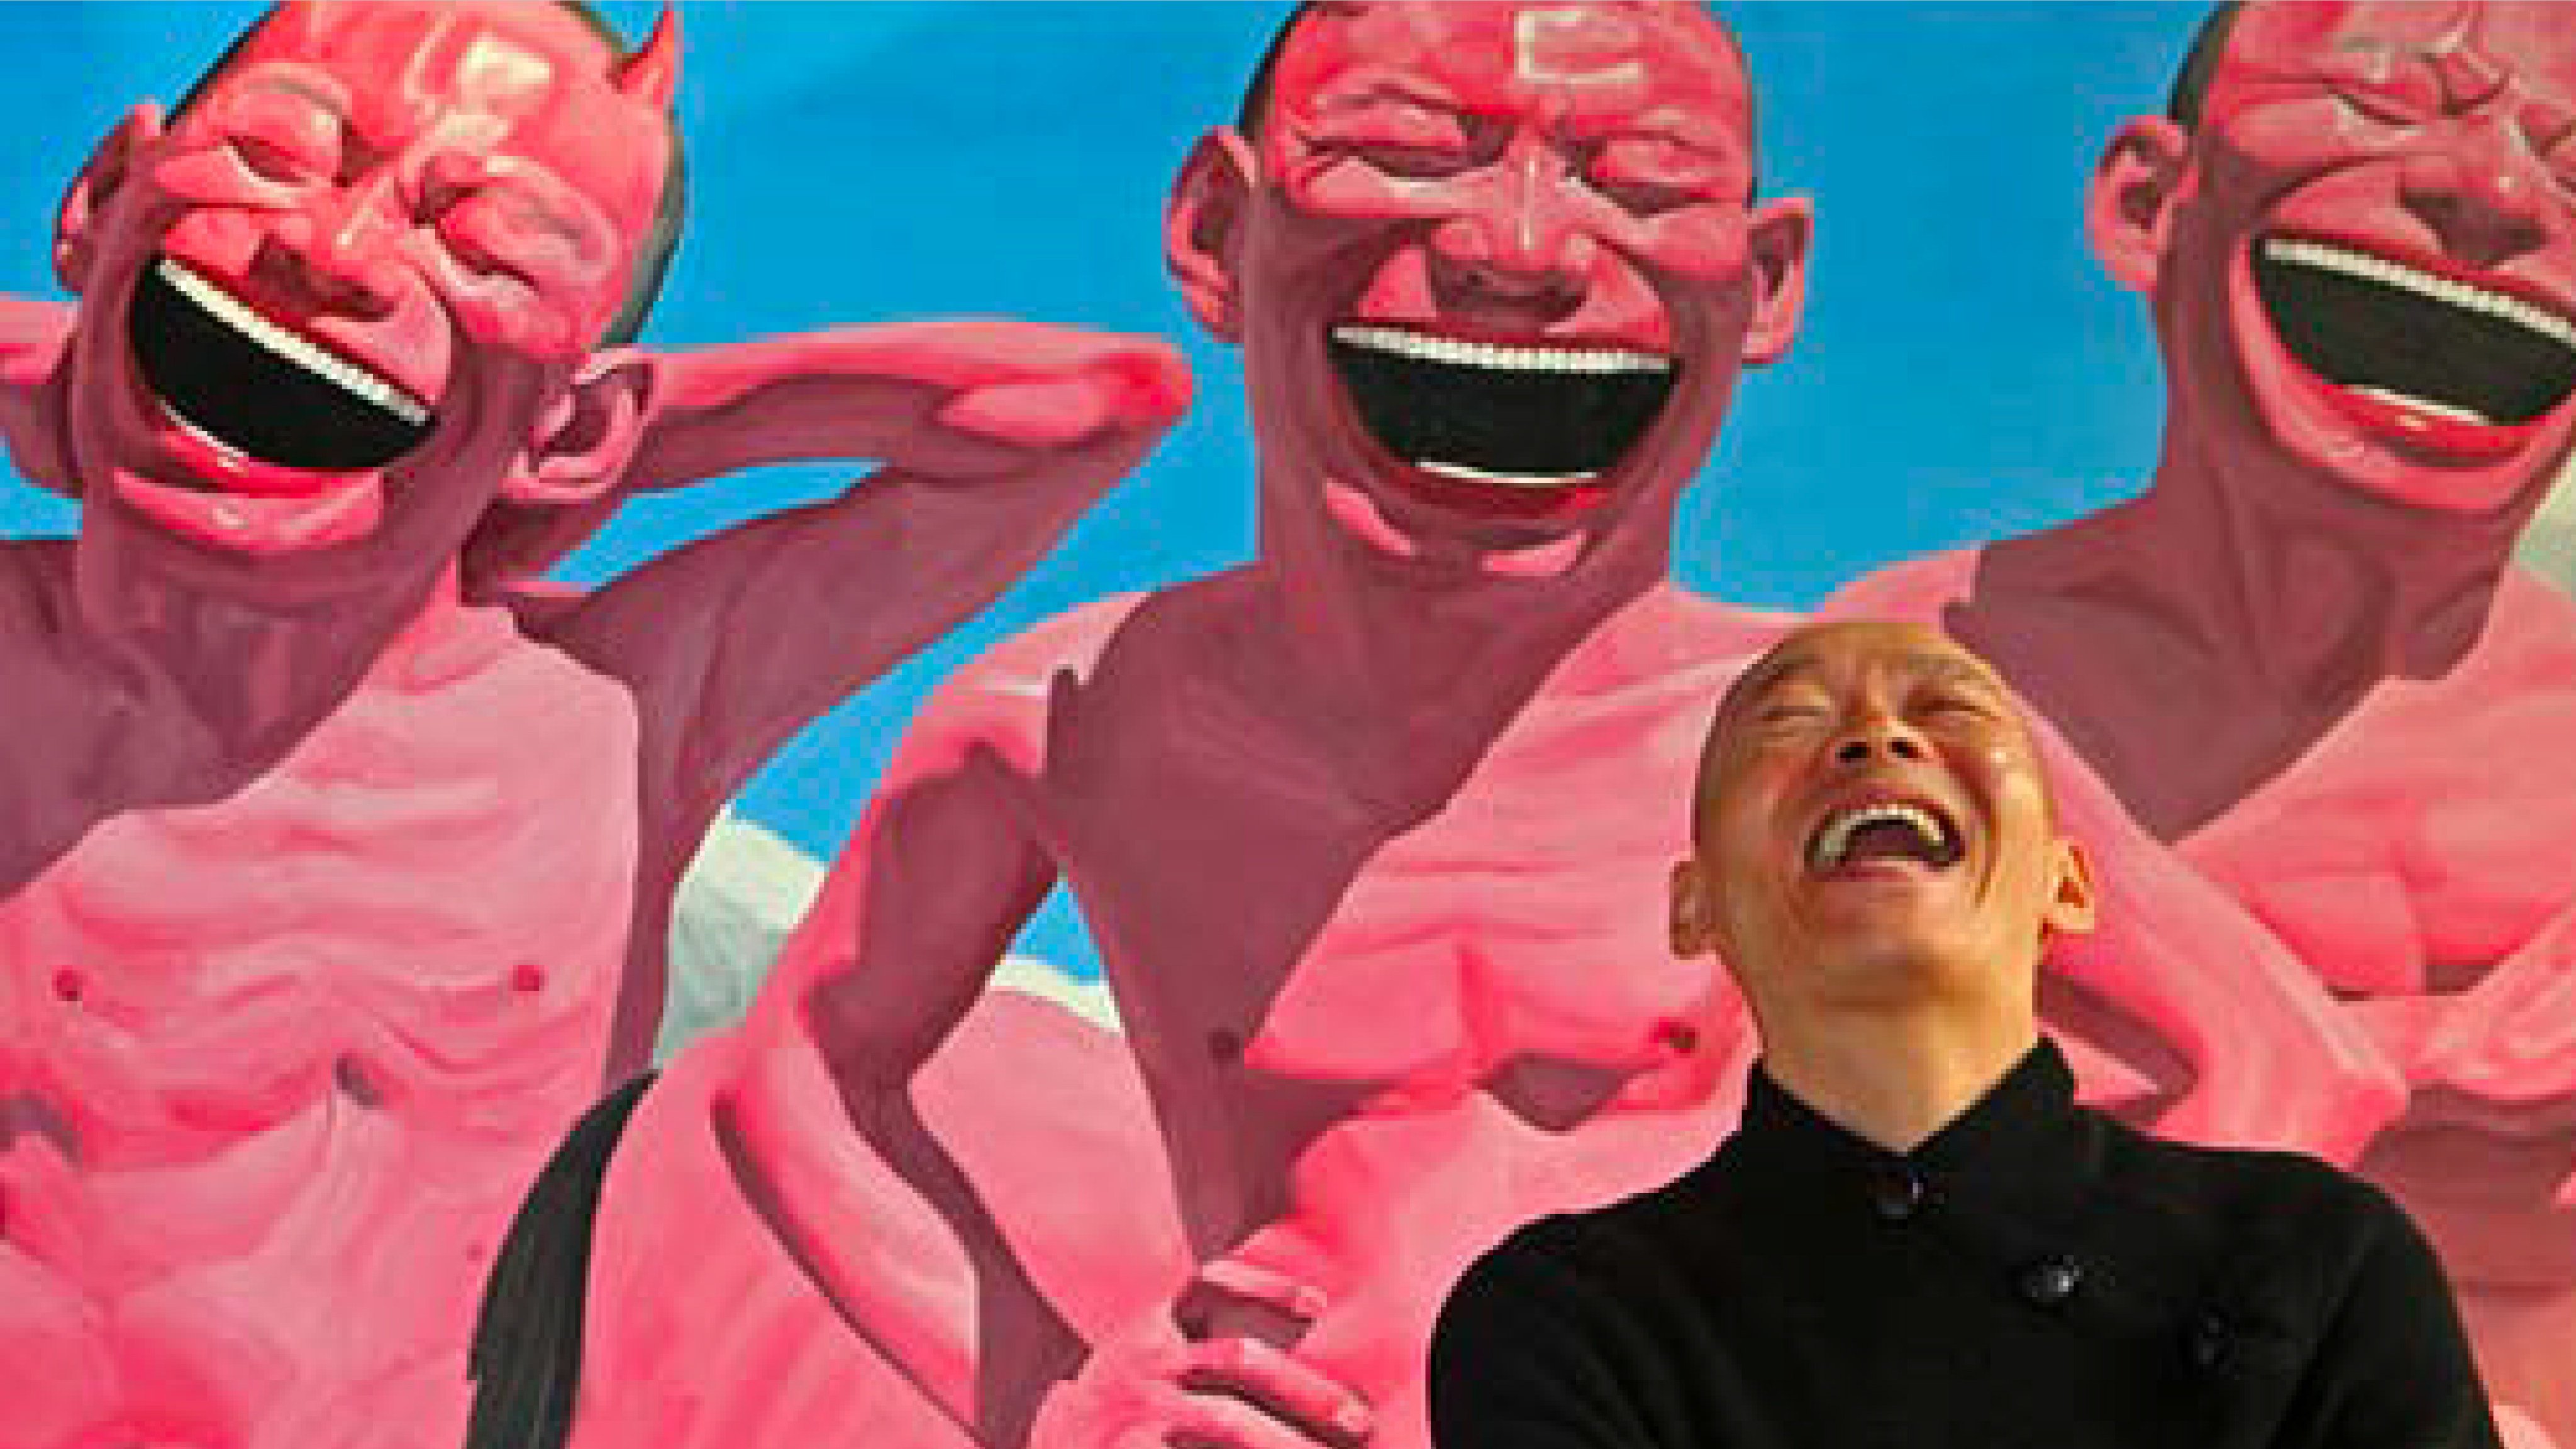 Chinese artist Yue Minjun posing in front of one of his “Laughing Man” paintings. His alter ego features in a collection of NFTs that are launching with the digital token market crashing, but he says his will have long-term value. Photo: Michelle Yue